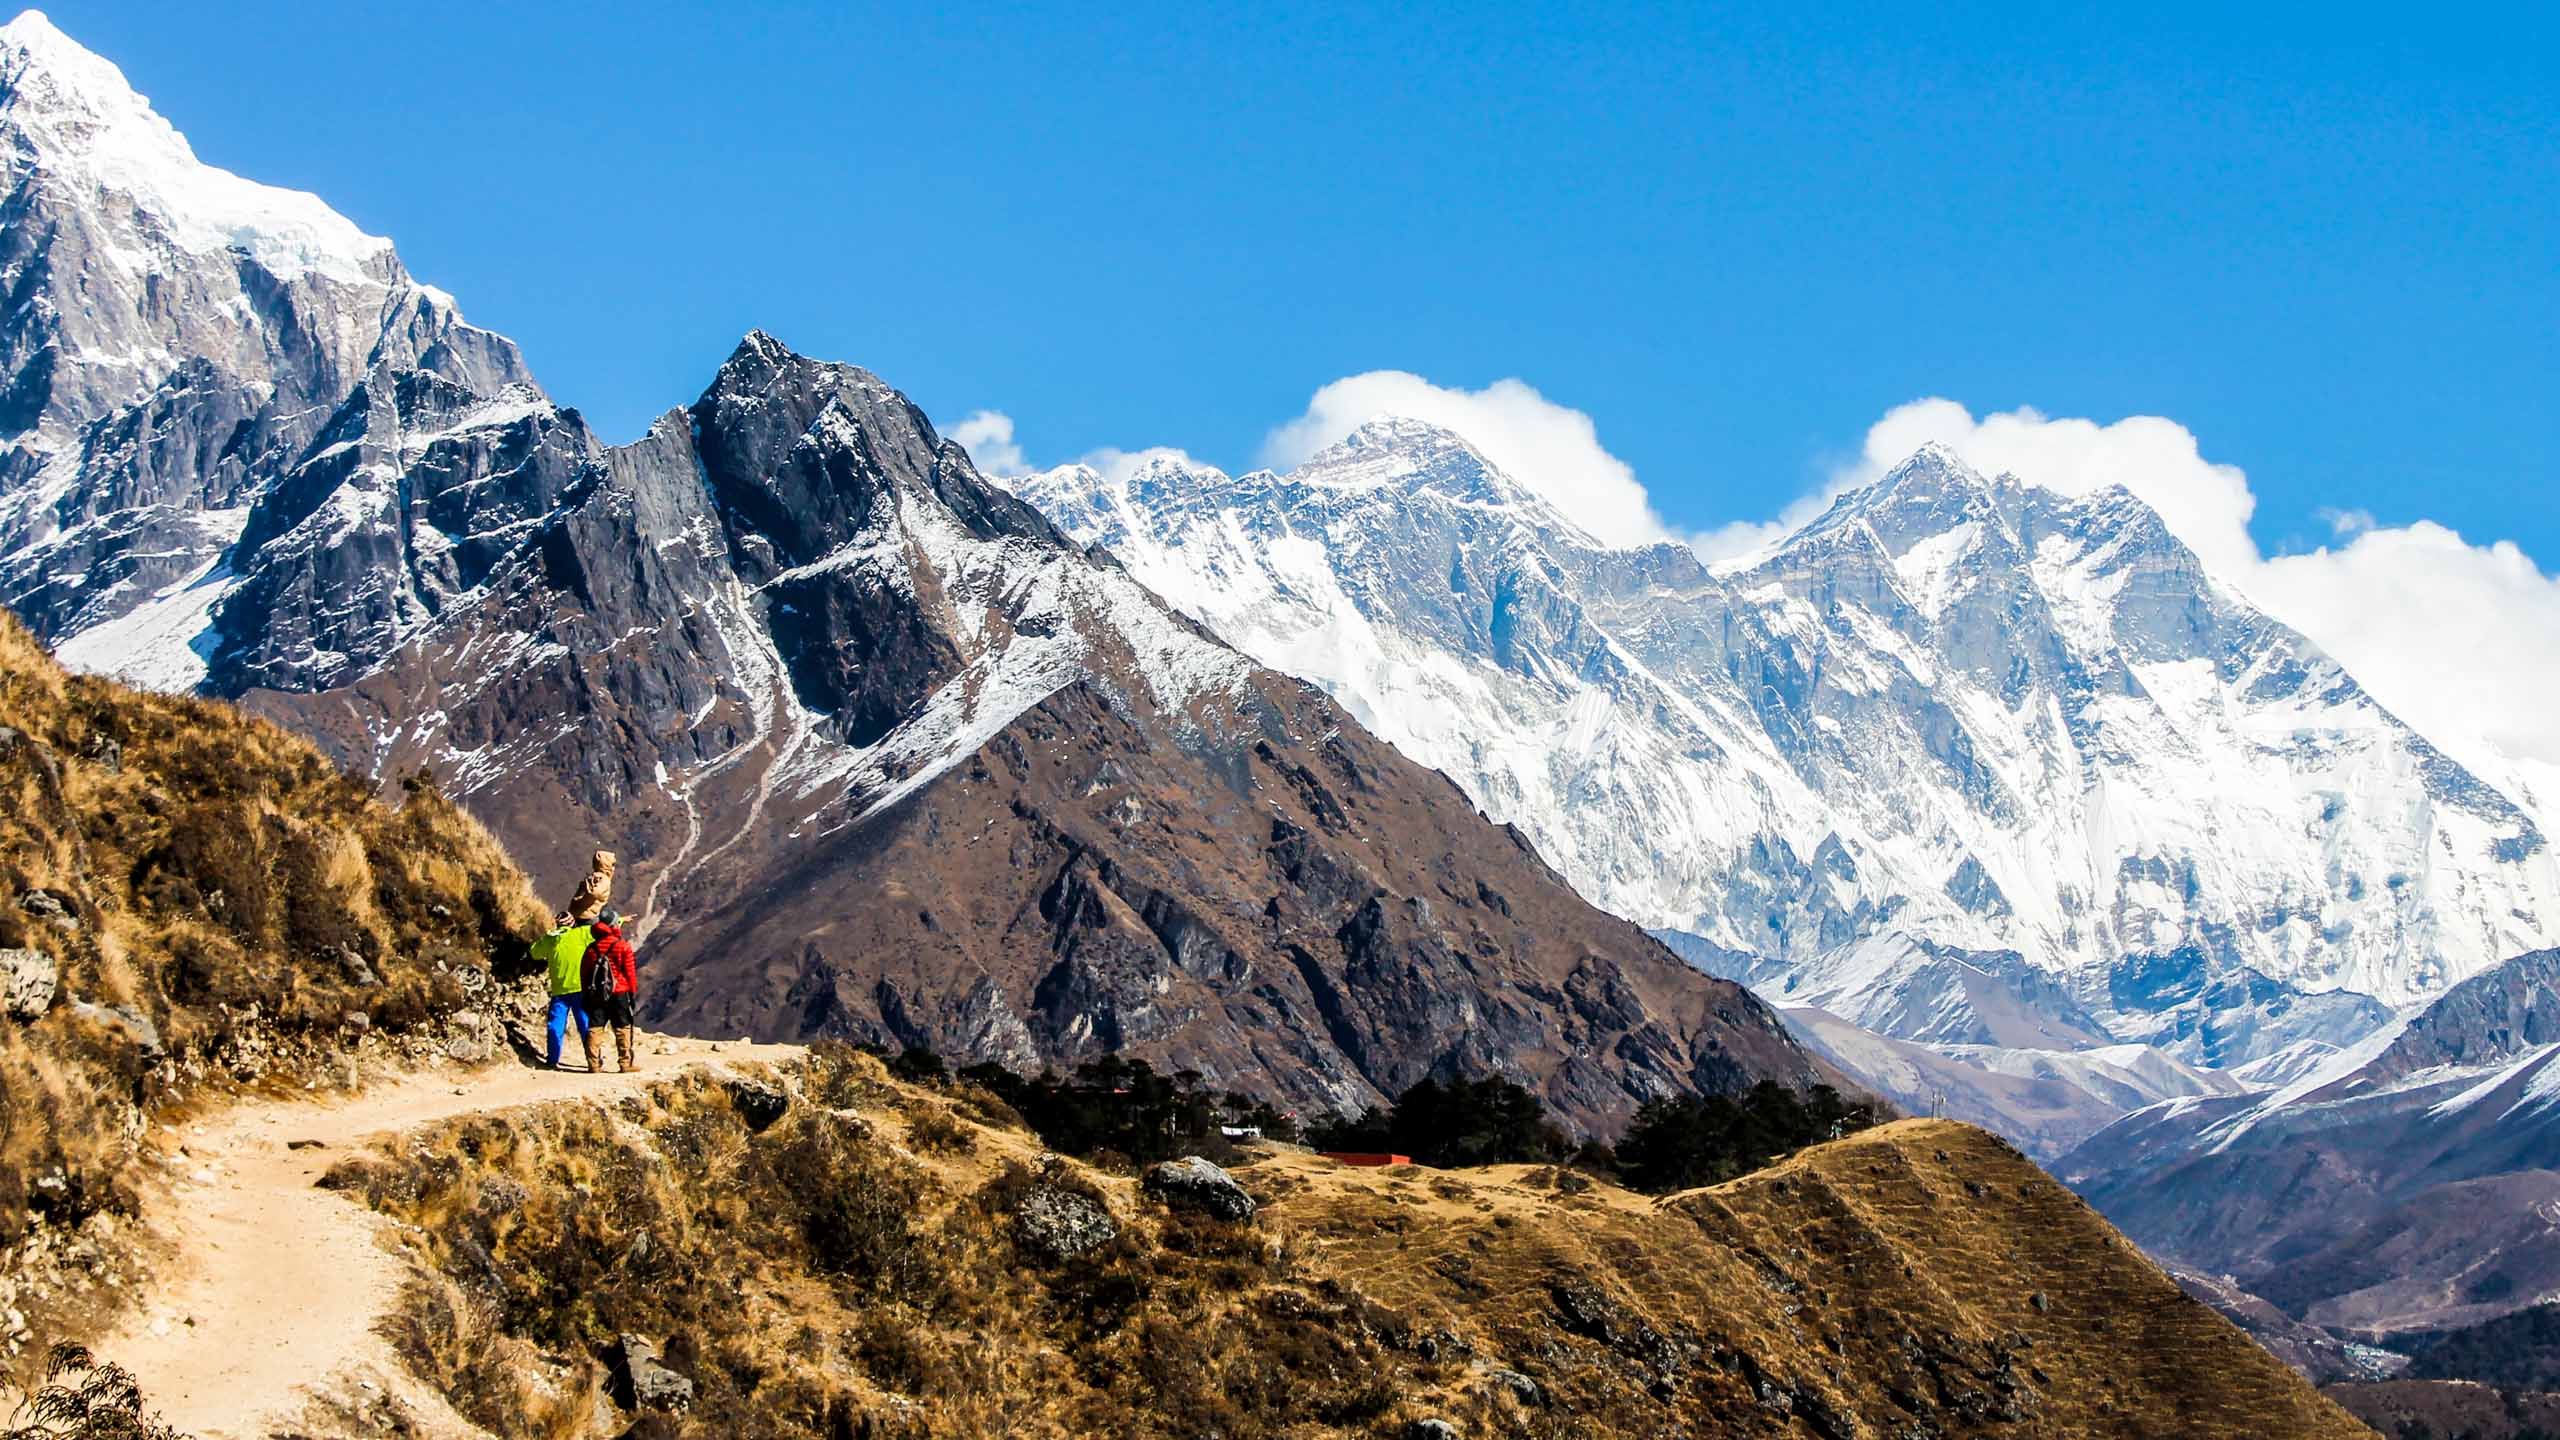 Hikers on trail in Nepal mountains